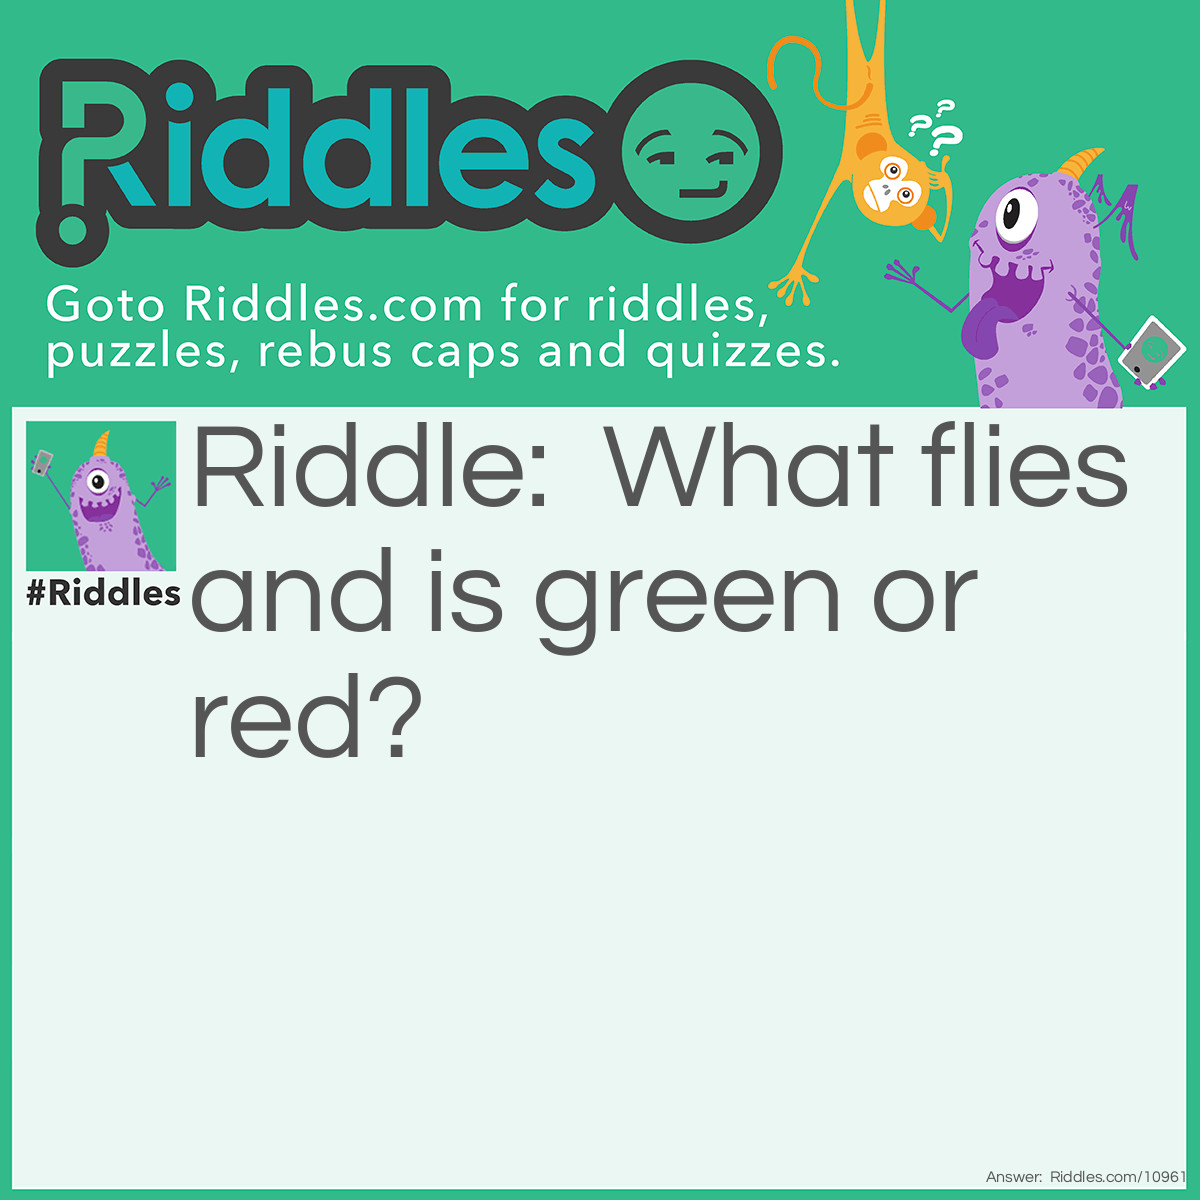 Riddle: What flies and is green or red? Answer: Parrot.